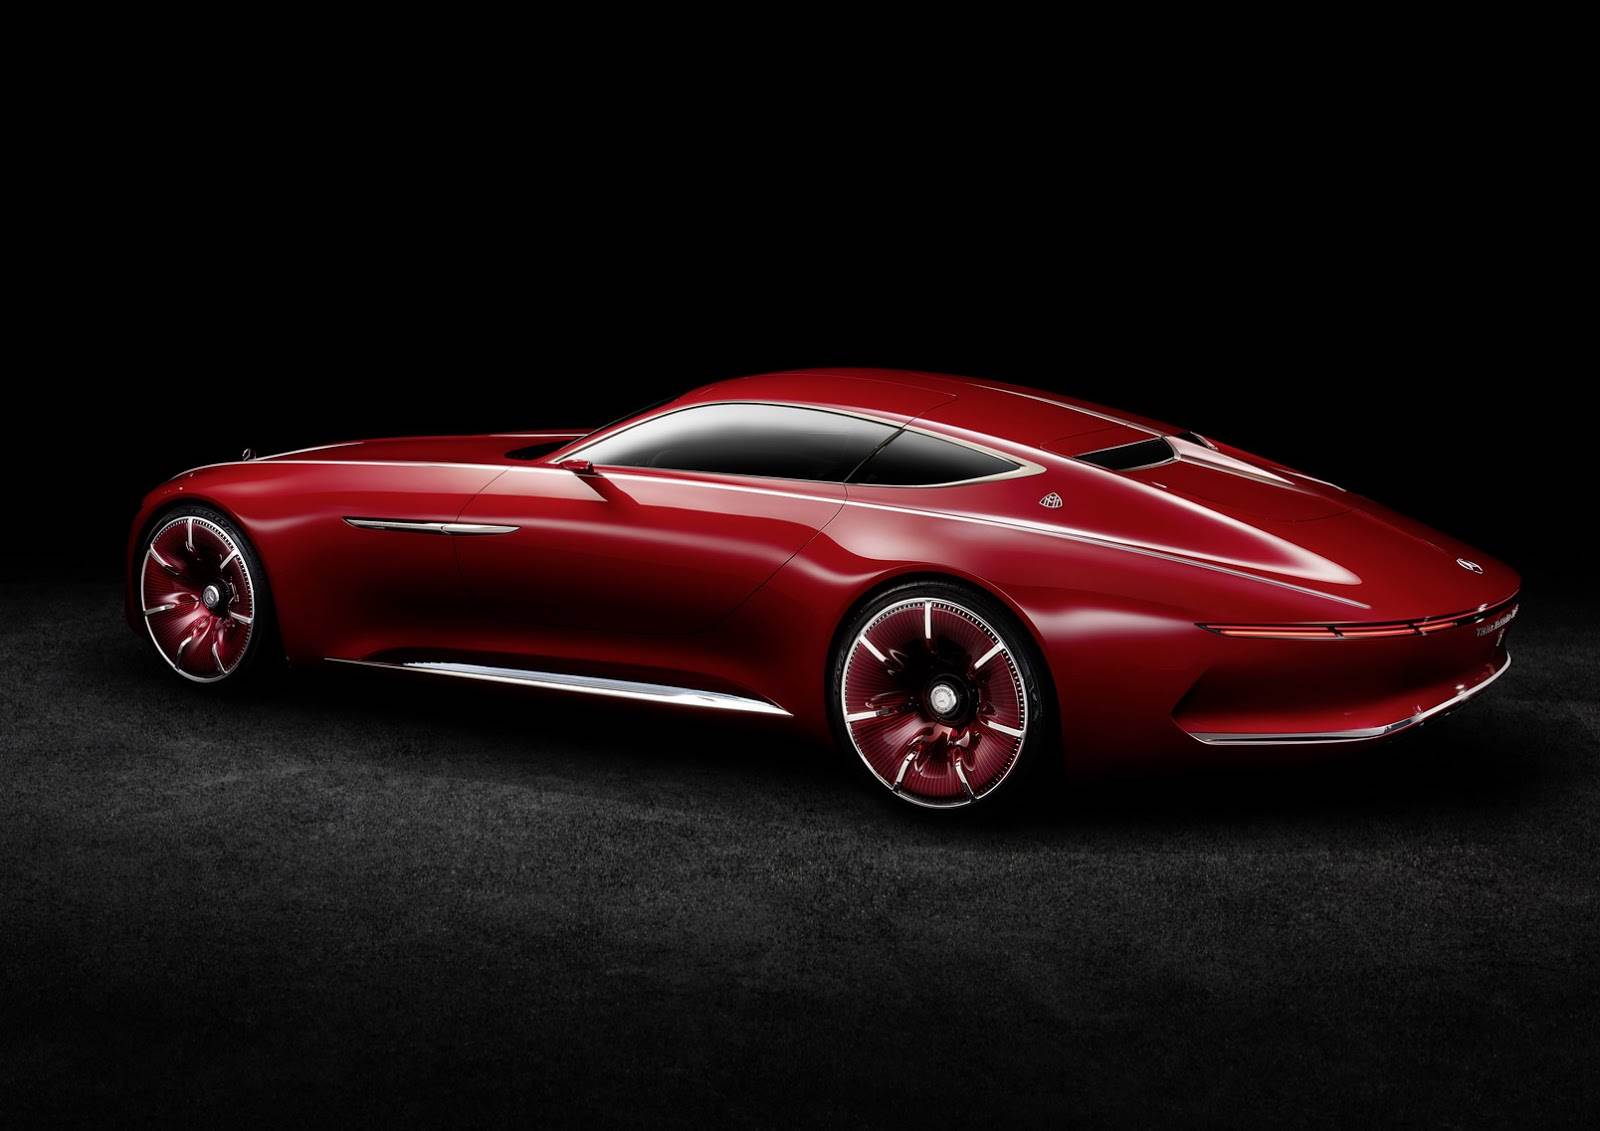 Vision Mercedes-Maybach 6 concept revealed